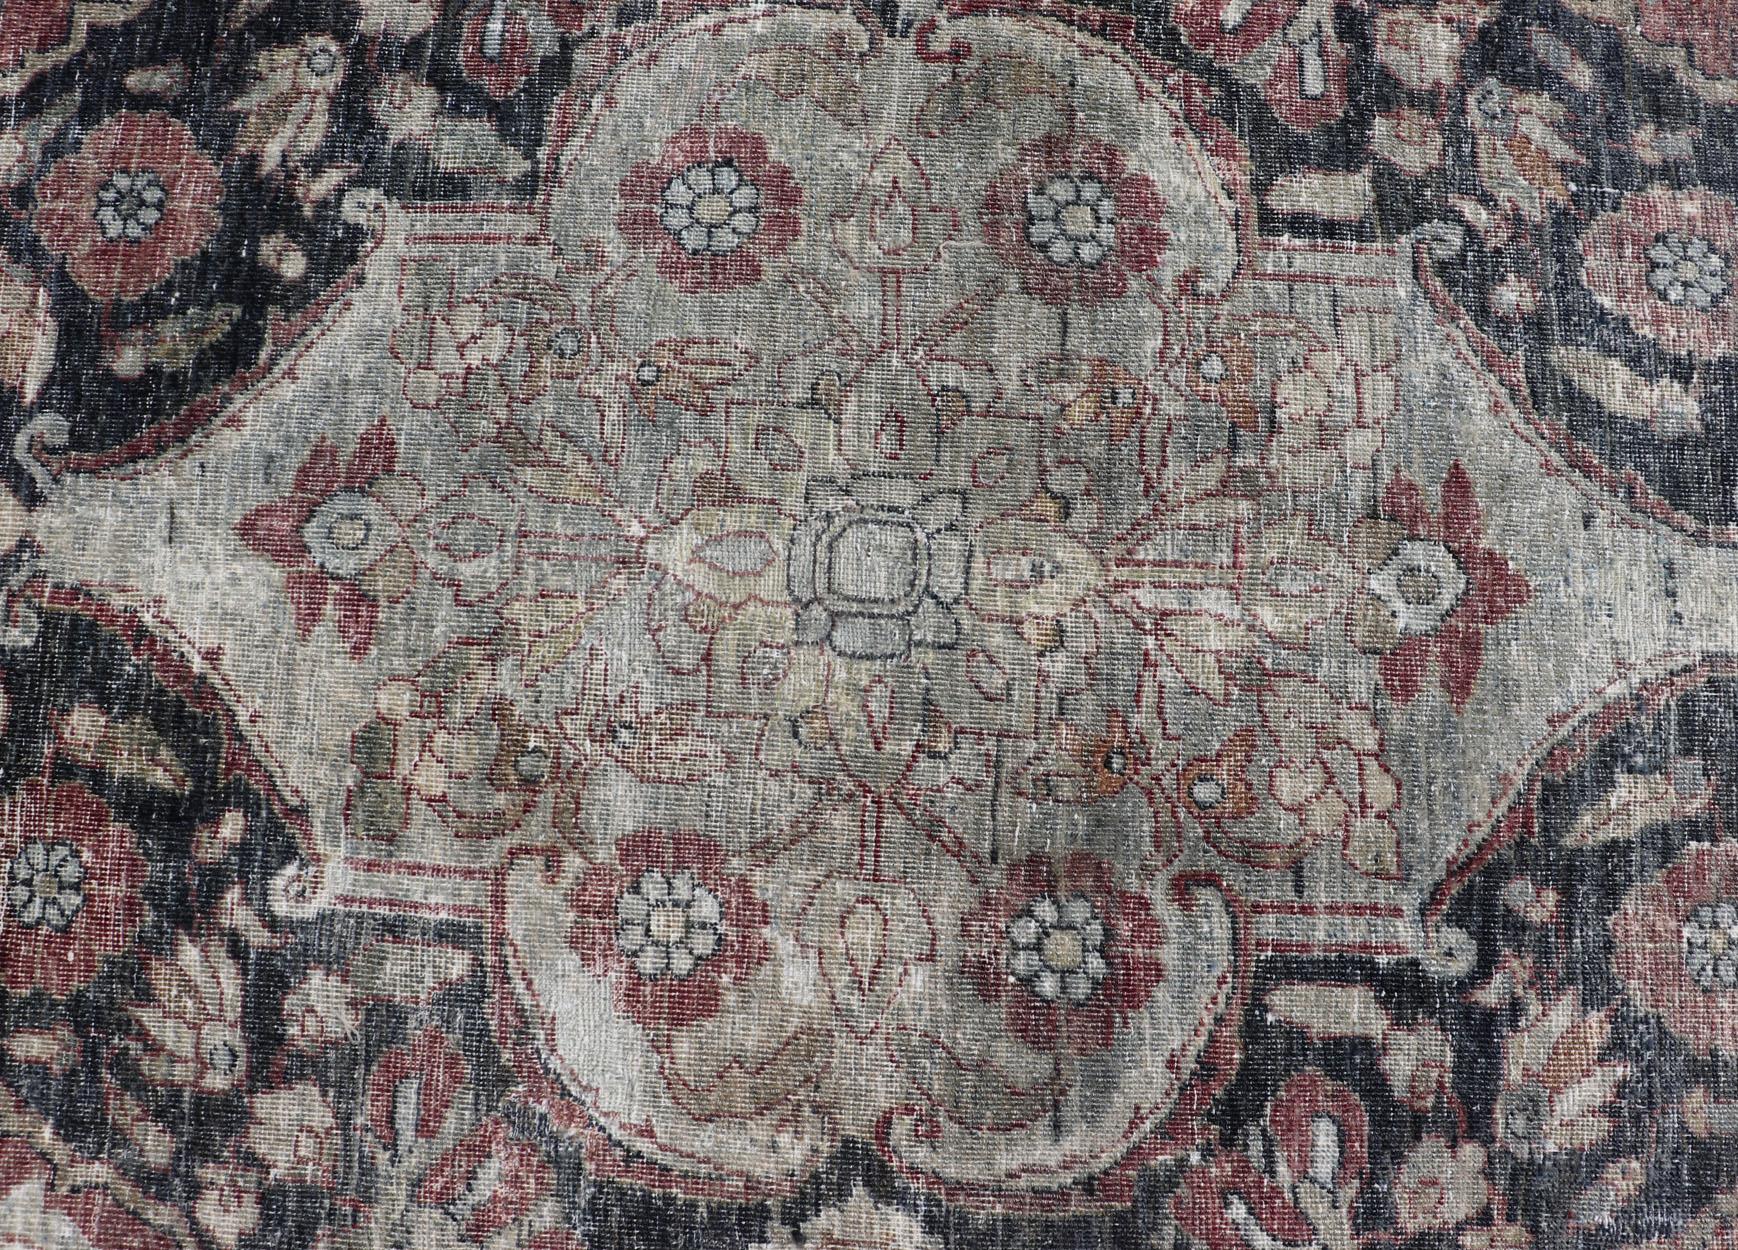 Antique Destressed Persian Yazd Rug in Charcoal, Copper, Warm Gray, Taupe & Rose For Sale 6